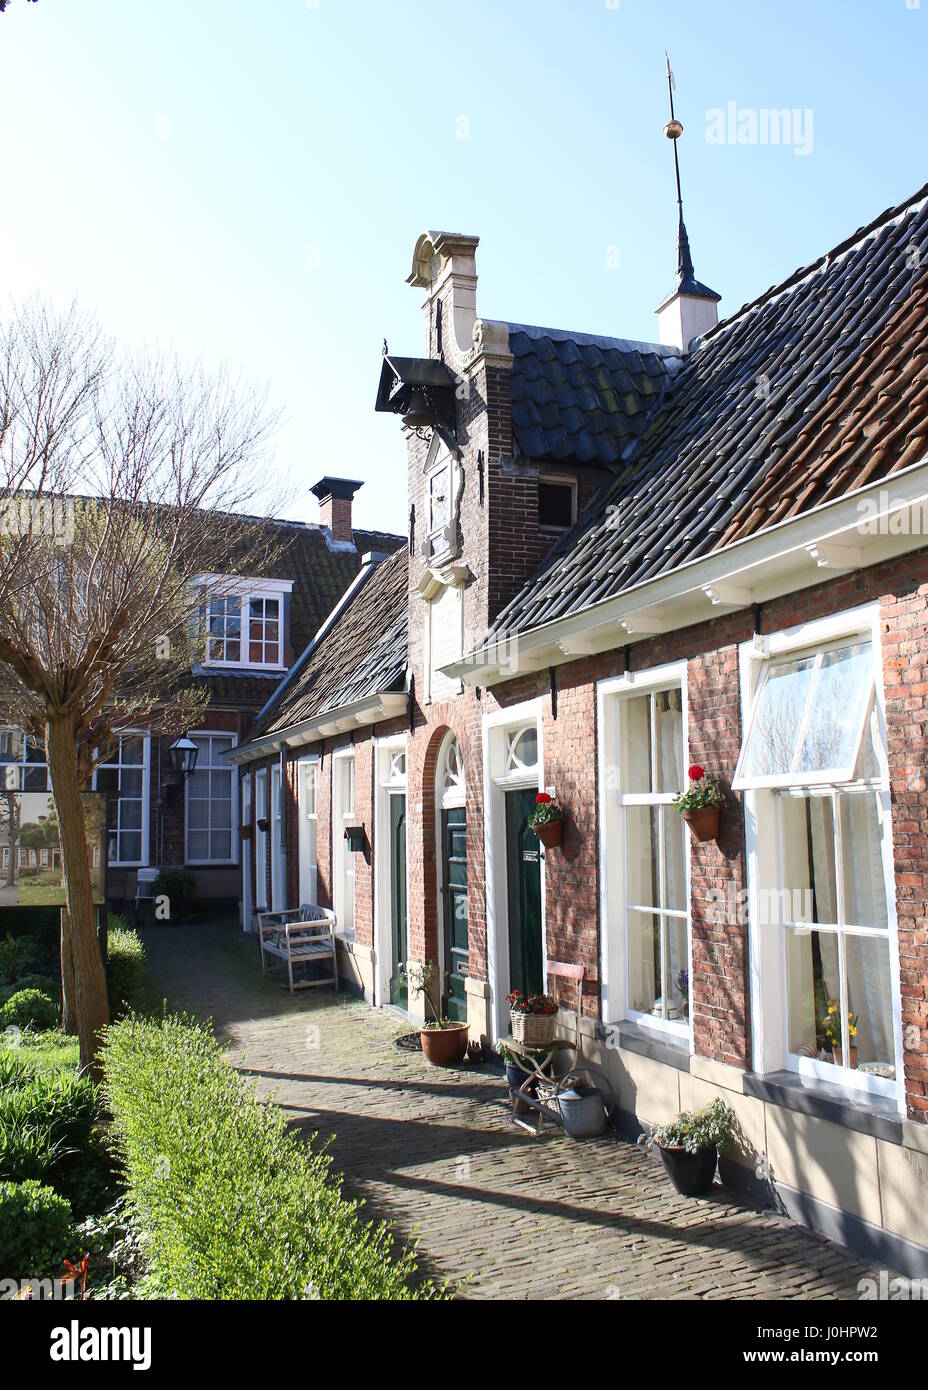 Sint Anthonygasthuis (Saint Antony's Hofje = courtyard with Almshouses), inner city of Groningen, Netherlands. Founded in 1517. Stock Photo